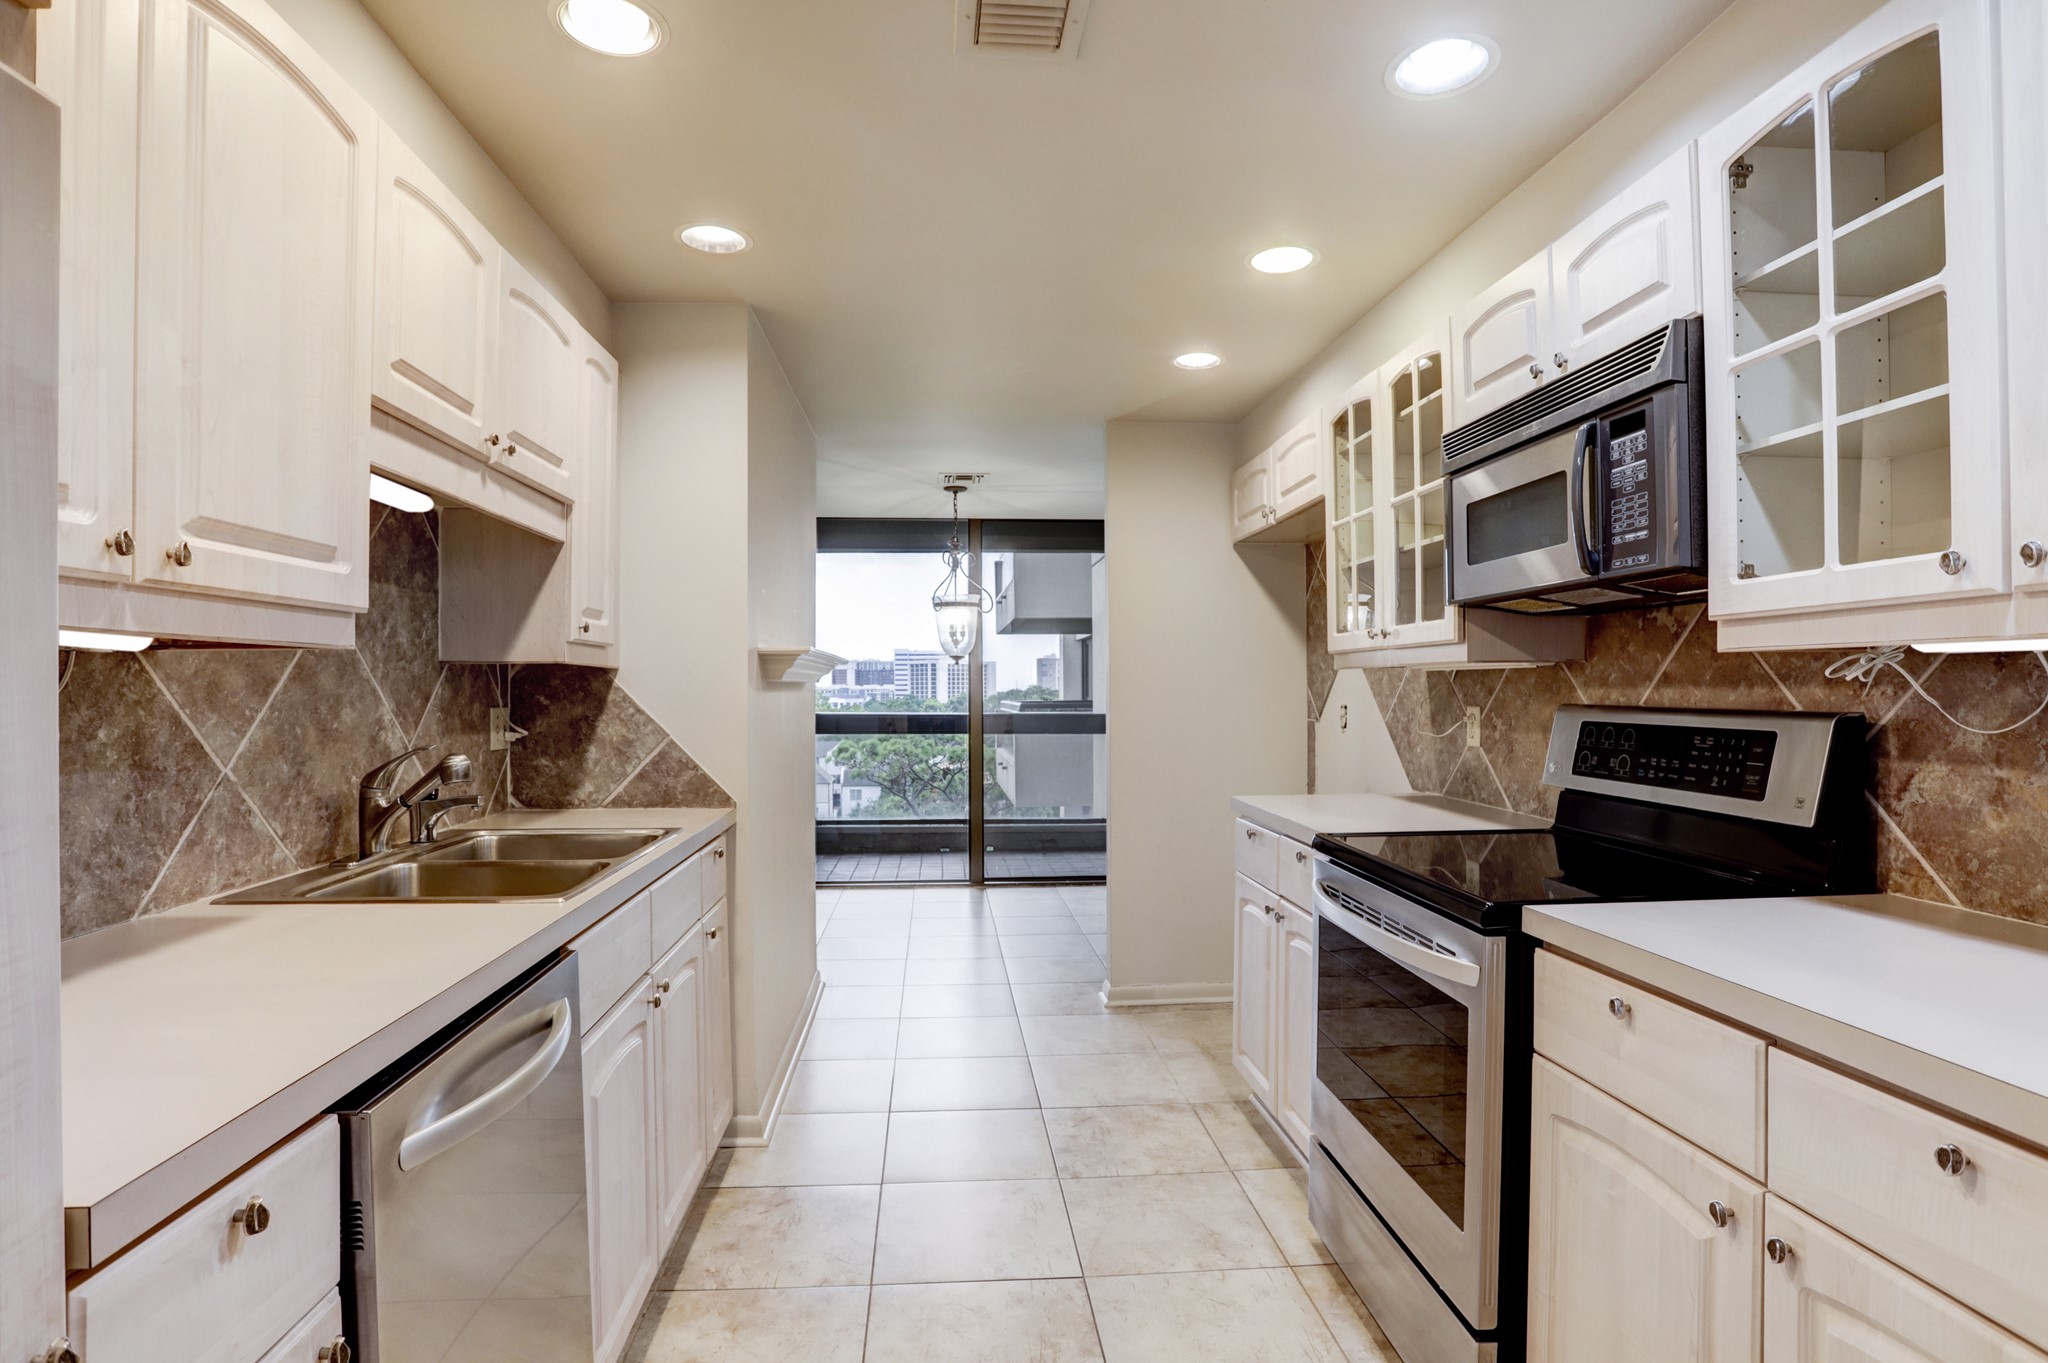 The spacious kitchen includes an eat in breakfast room.